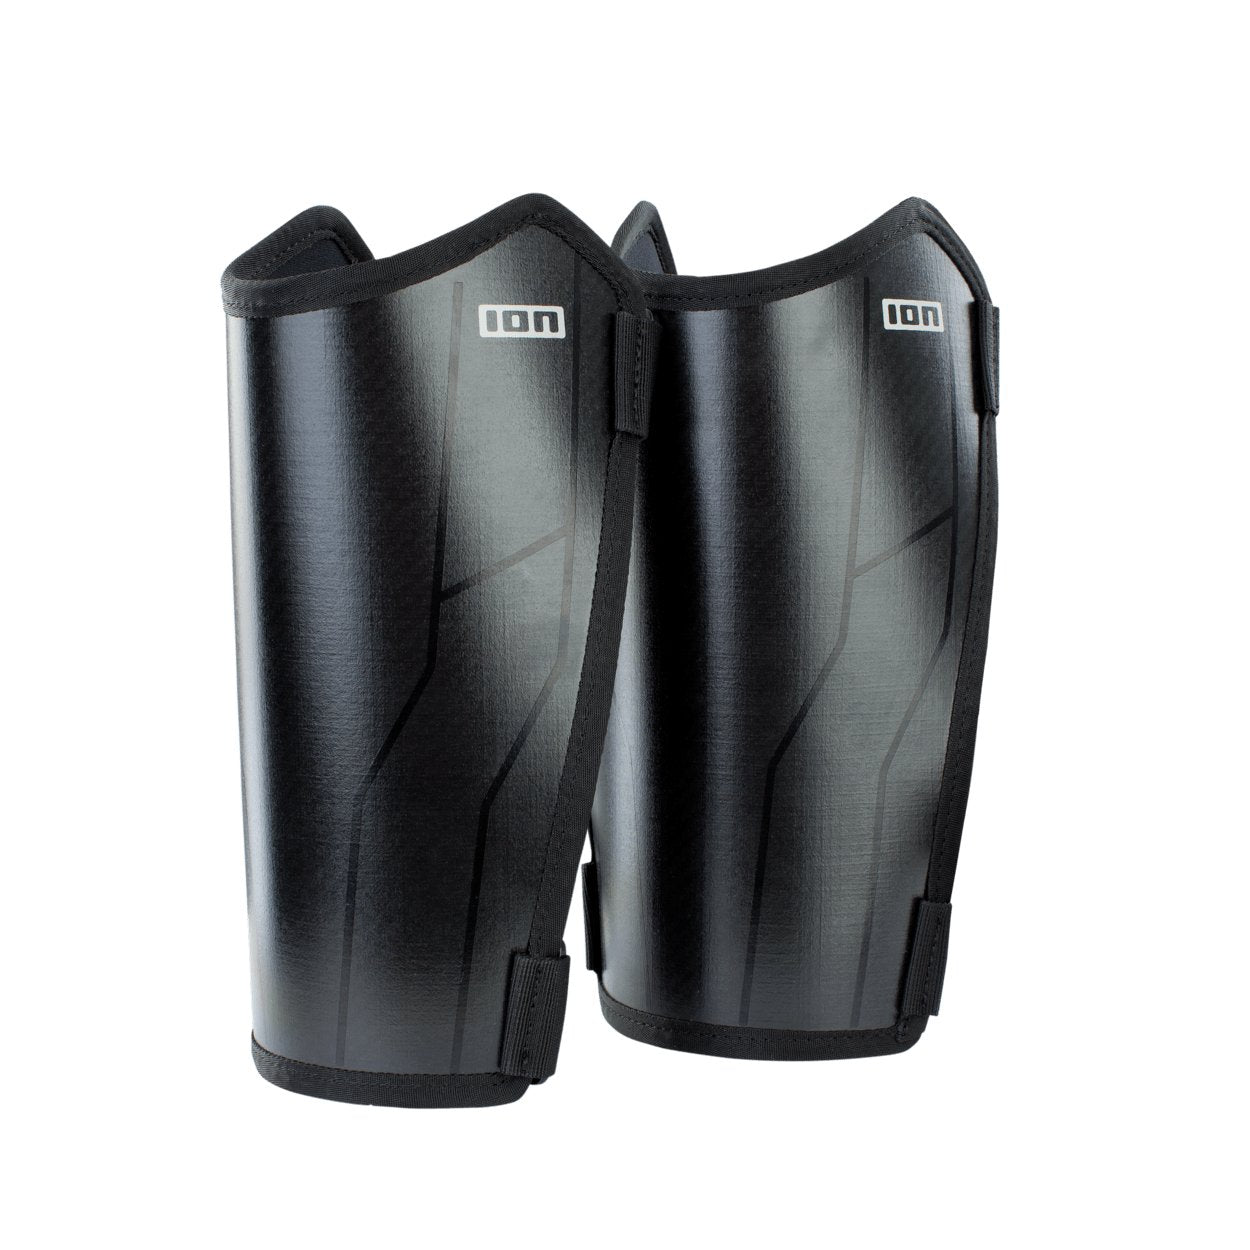 ION Shin Protector 2022 - Worthing Watersports - 9008415965687 - Protection - ION Water